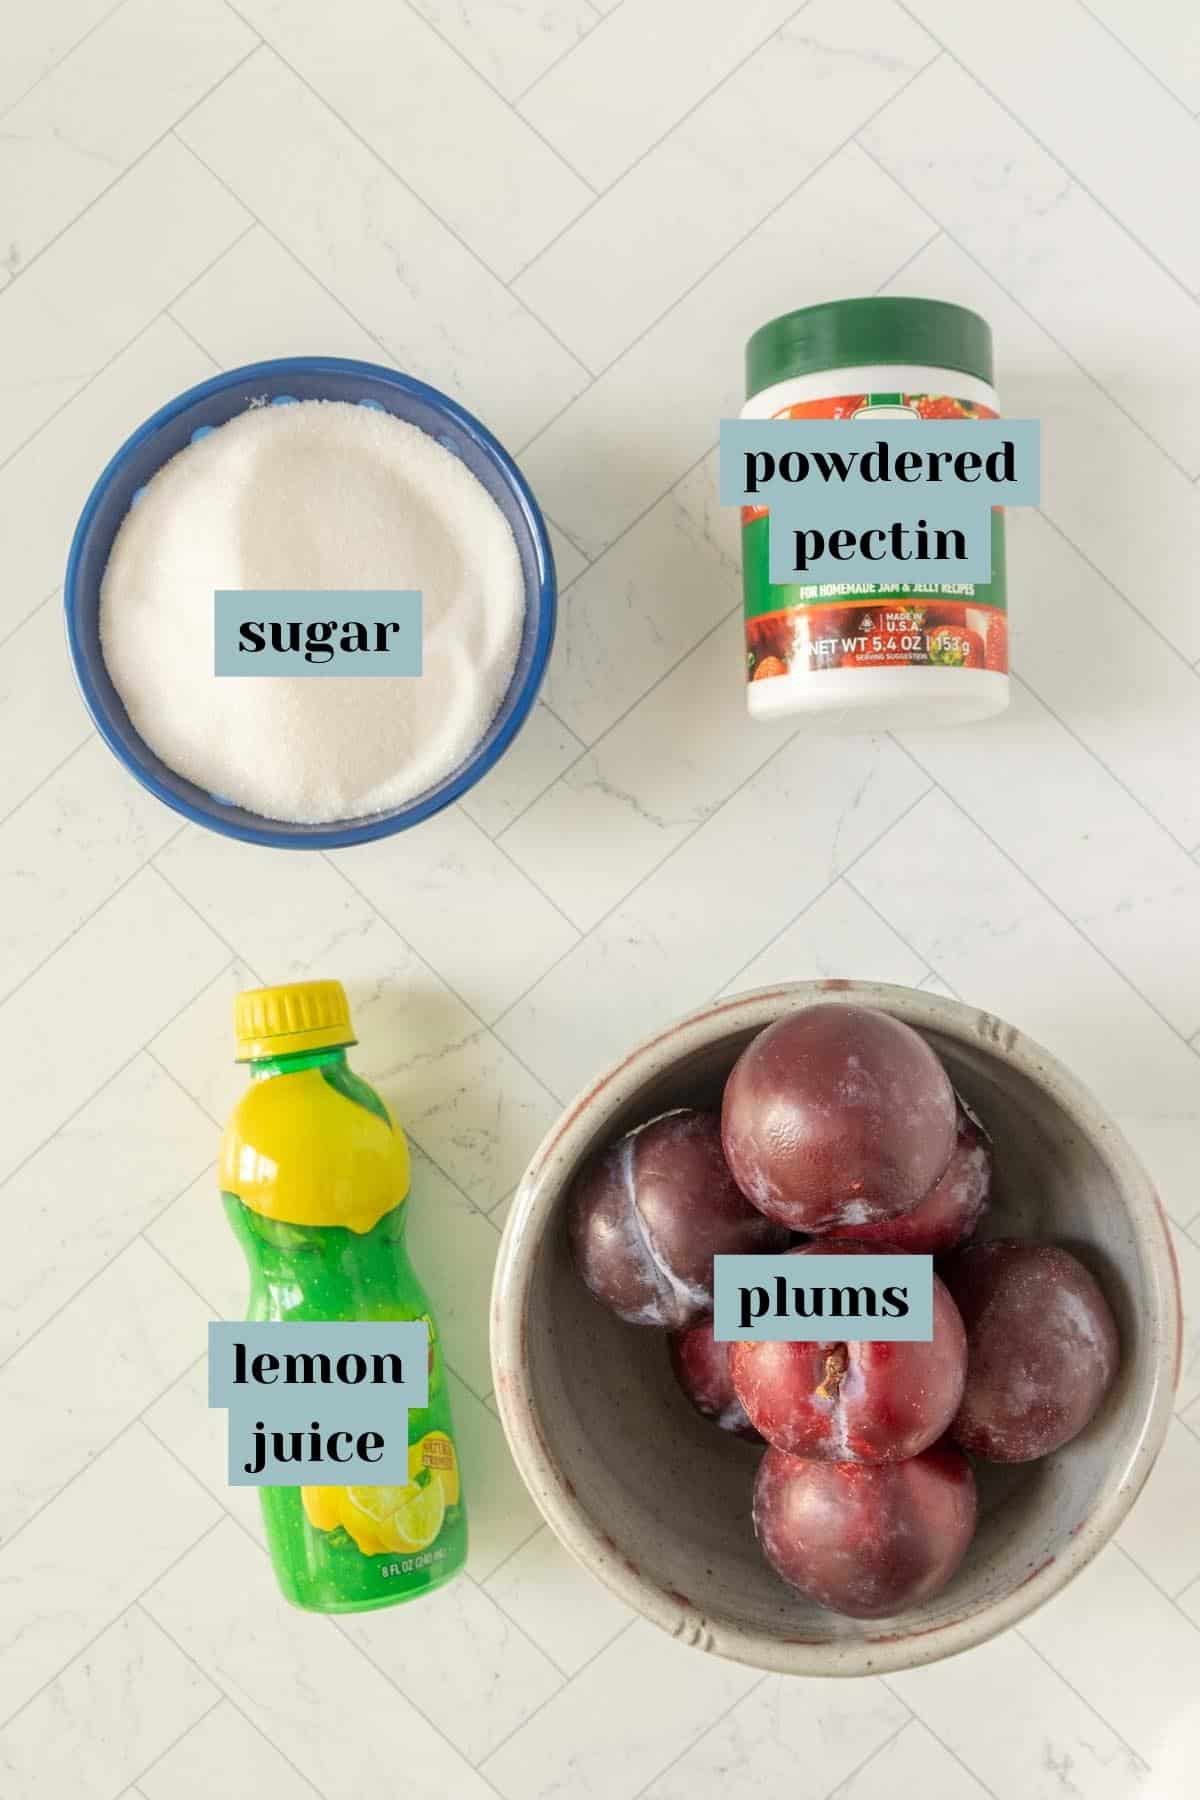 The ingredients for a plum dessert are shown on a marble countertop.